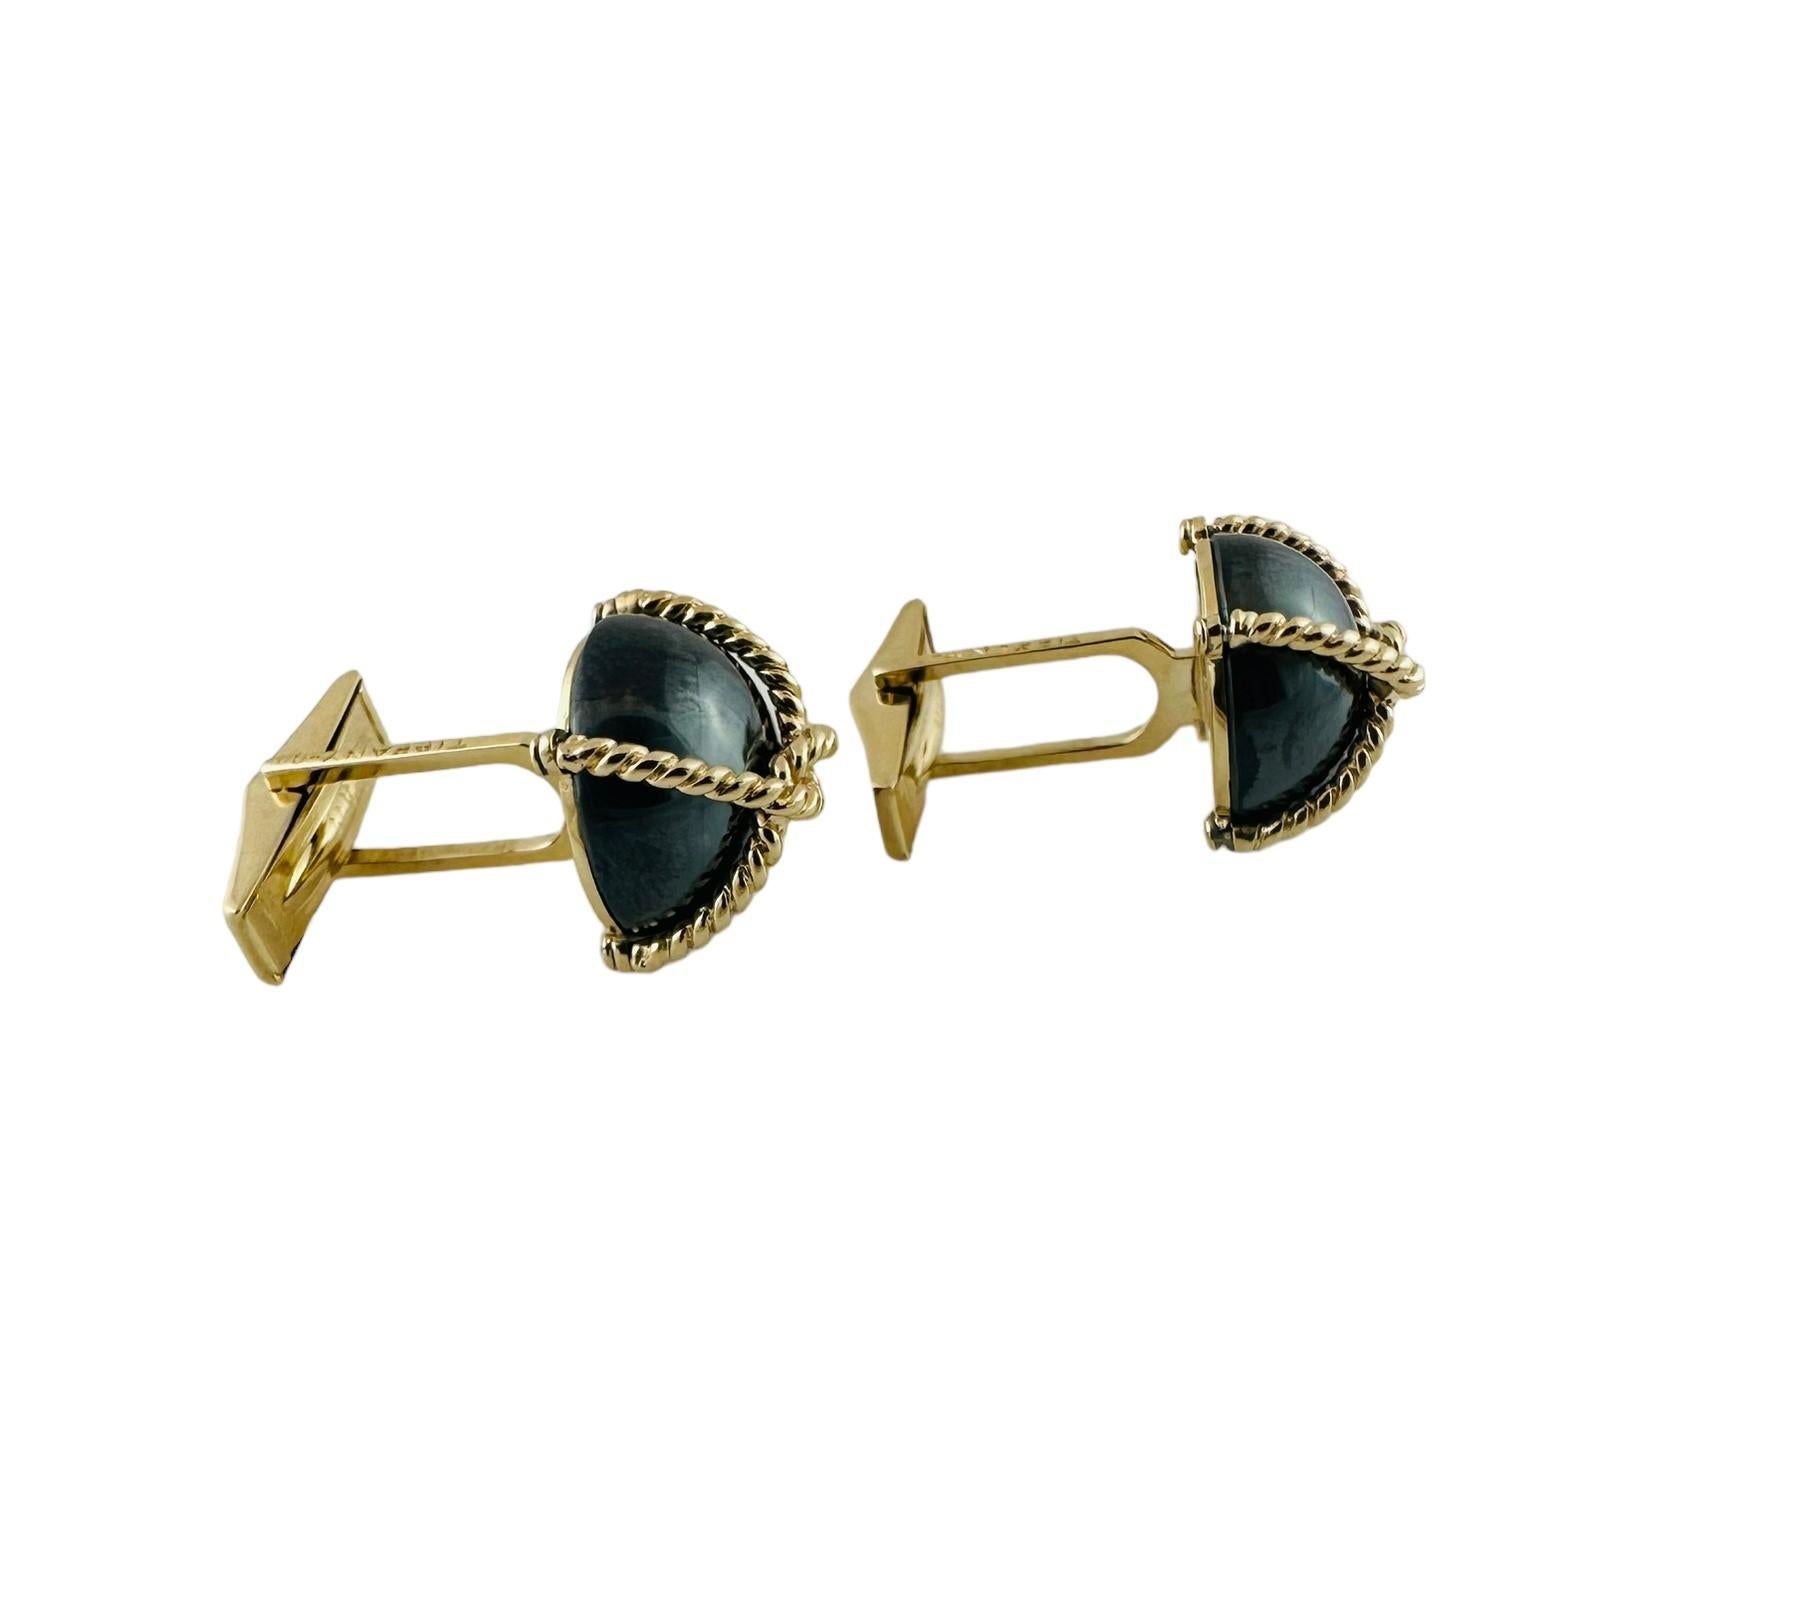 Vintage Tiffany & Co. 14K Yellow Gold Hematite Cufflinks

These Tiffany & Co. cufflinks are set in yellow gold each with a cabochon hematite stone at front.

Cufflinks are approx. 1